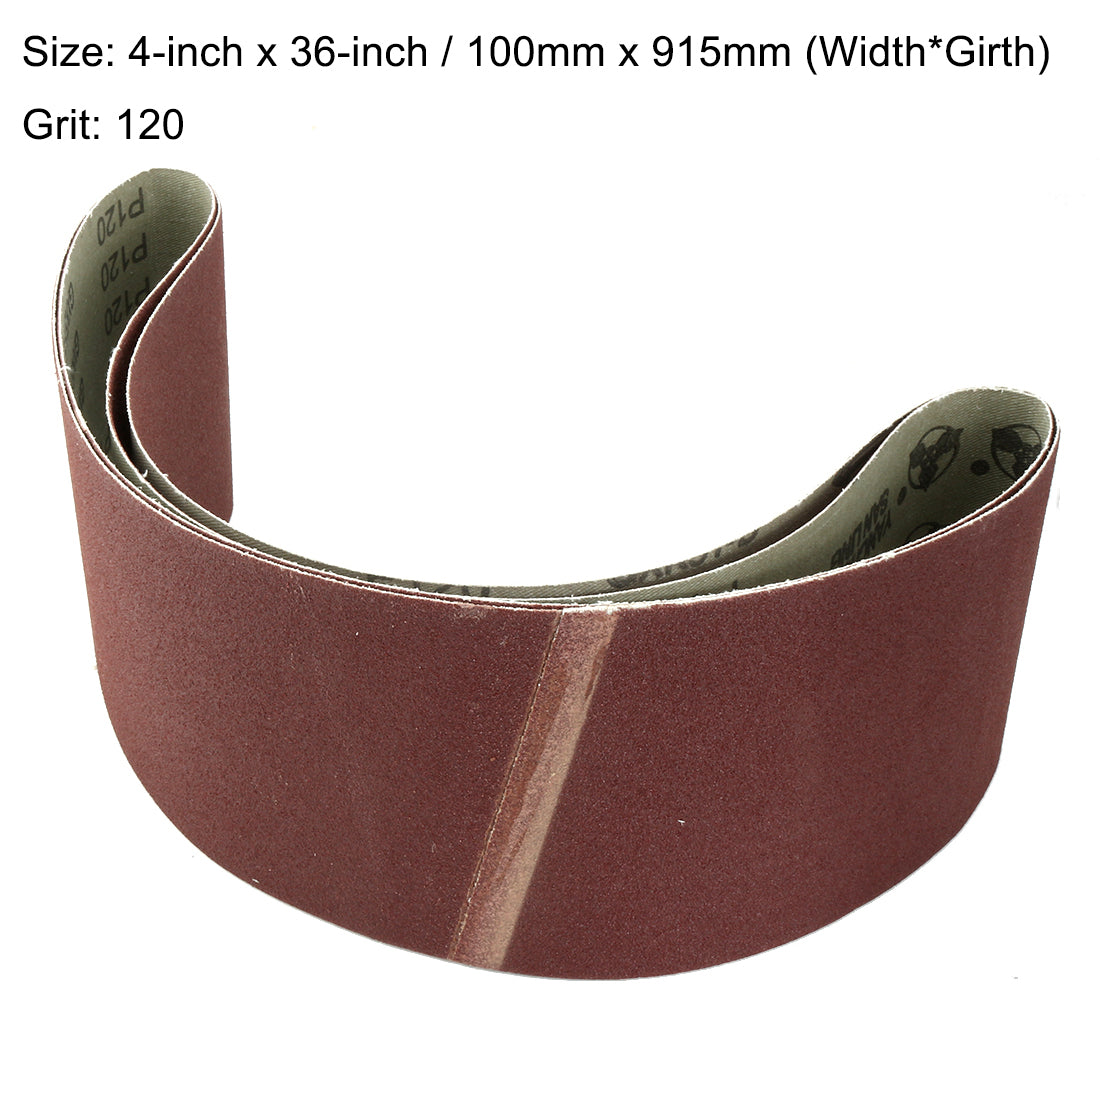 uxcell Uxcell 4-Inch x 36-Inch Aluminum Oxide Sanding Belt 120 Grits Lapped Joint 2pcs